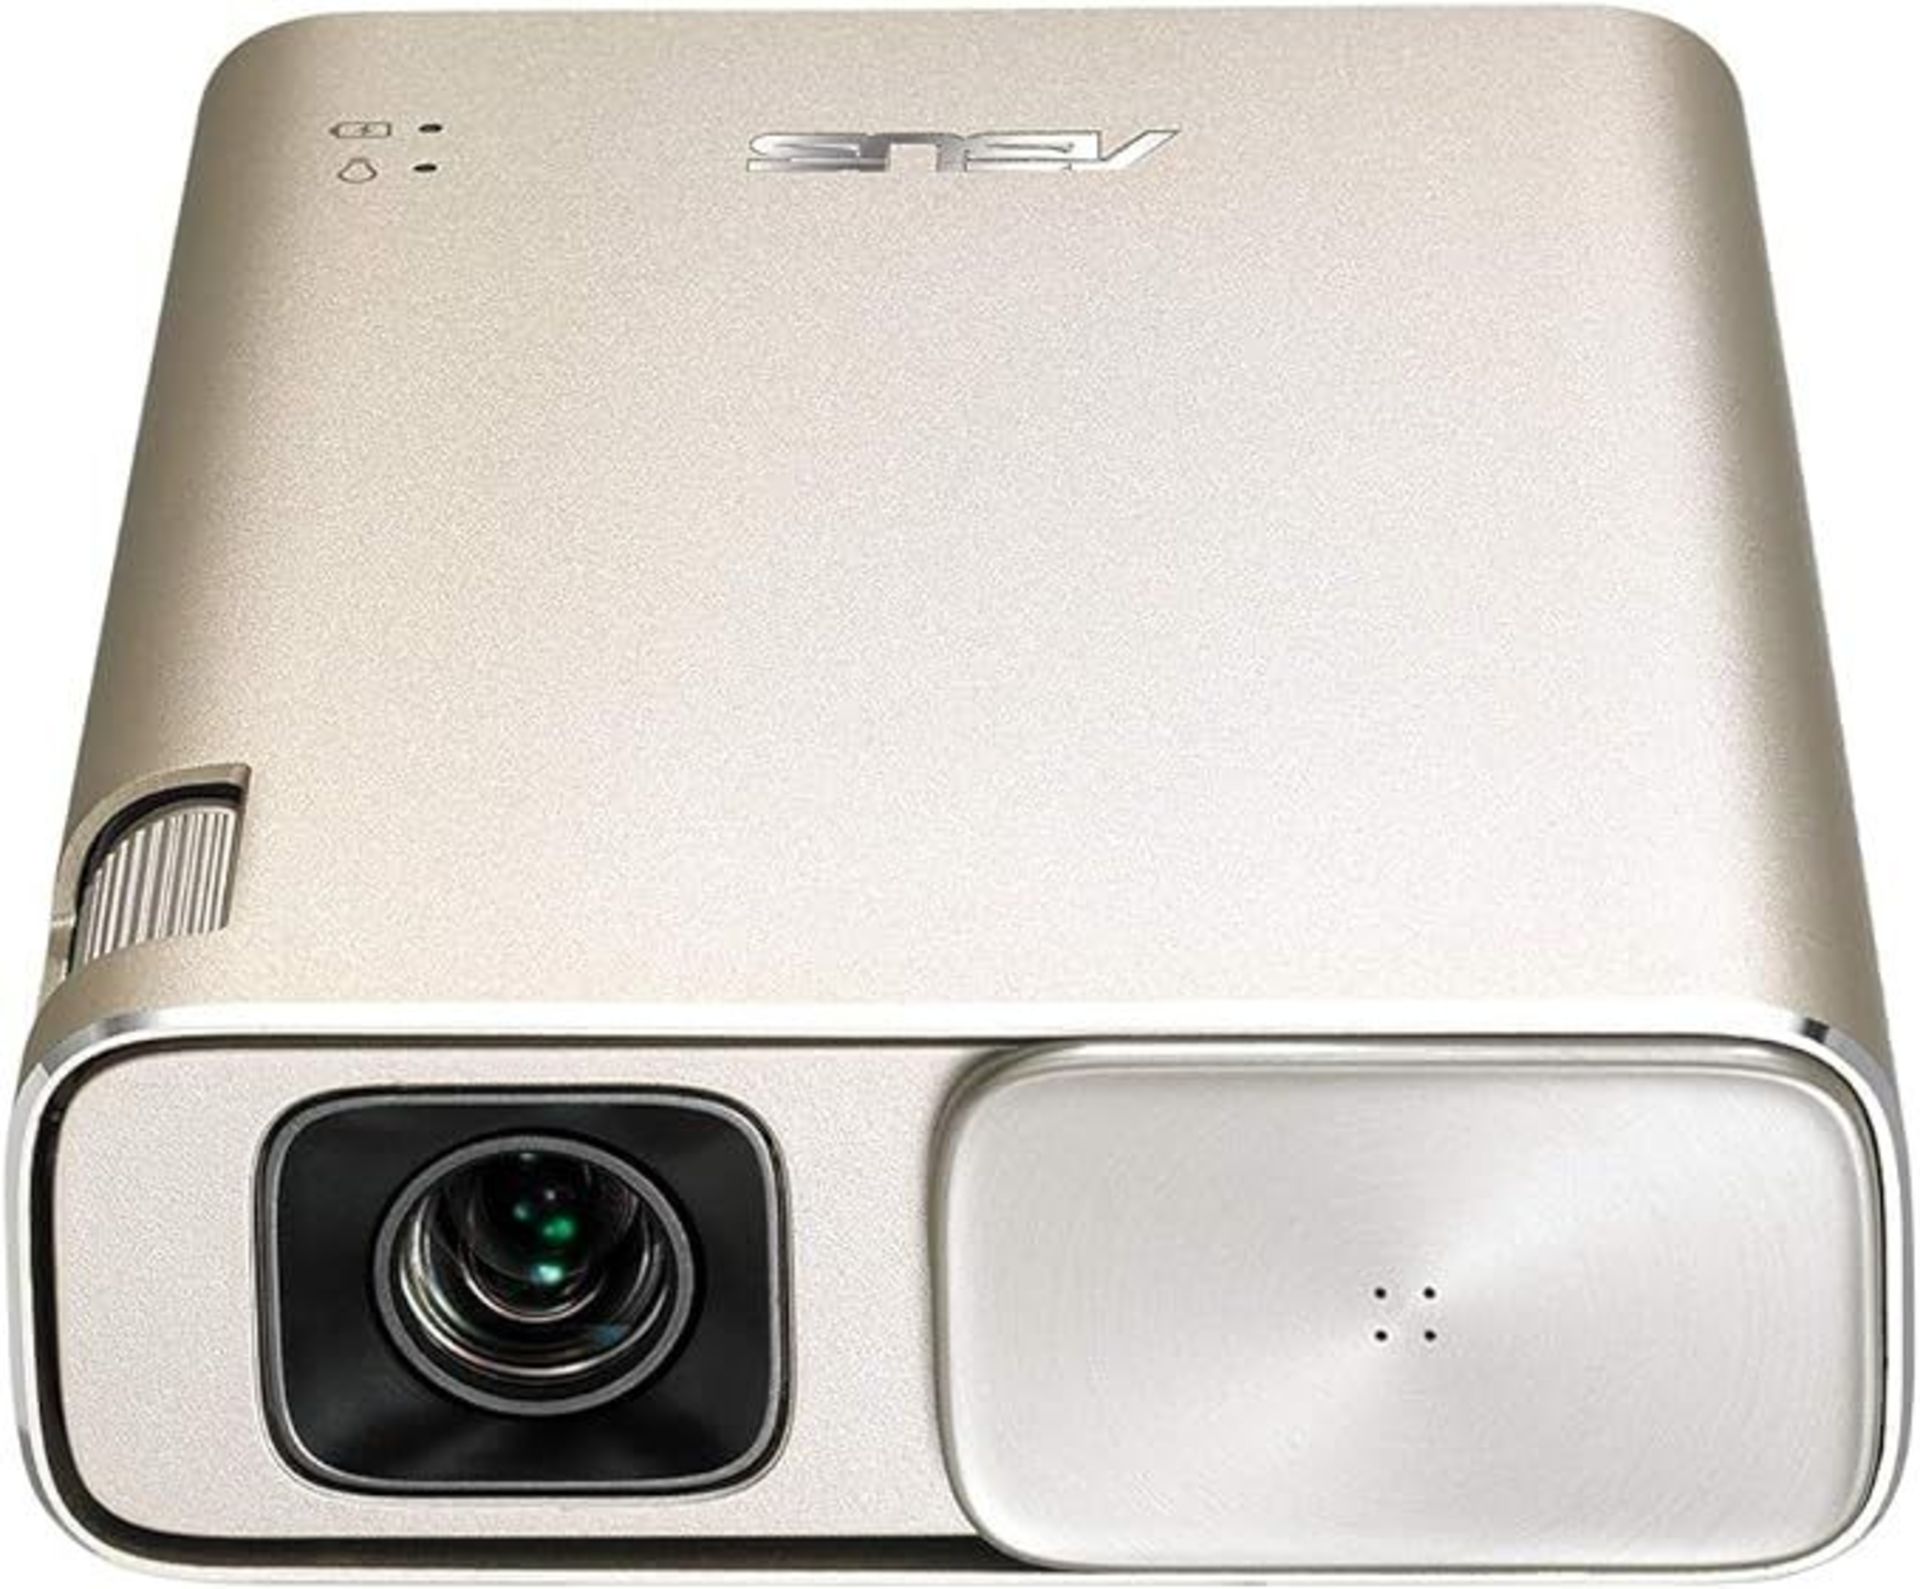 ASUS ZenBeam Go E1Z Portable LED Projector, USB Connection, 150 Lumens, Built-In 6000 mAh Battery, 5 - Image 2 of 2